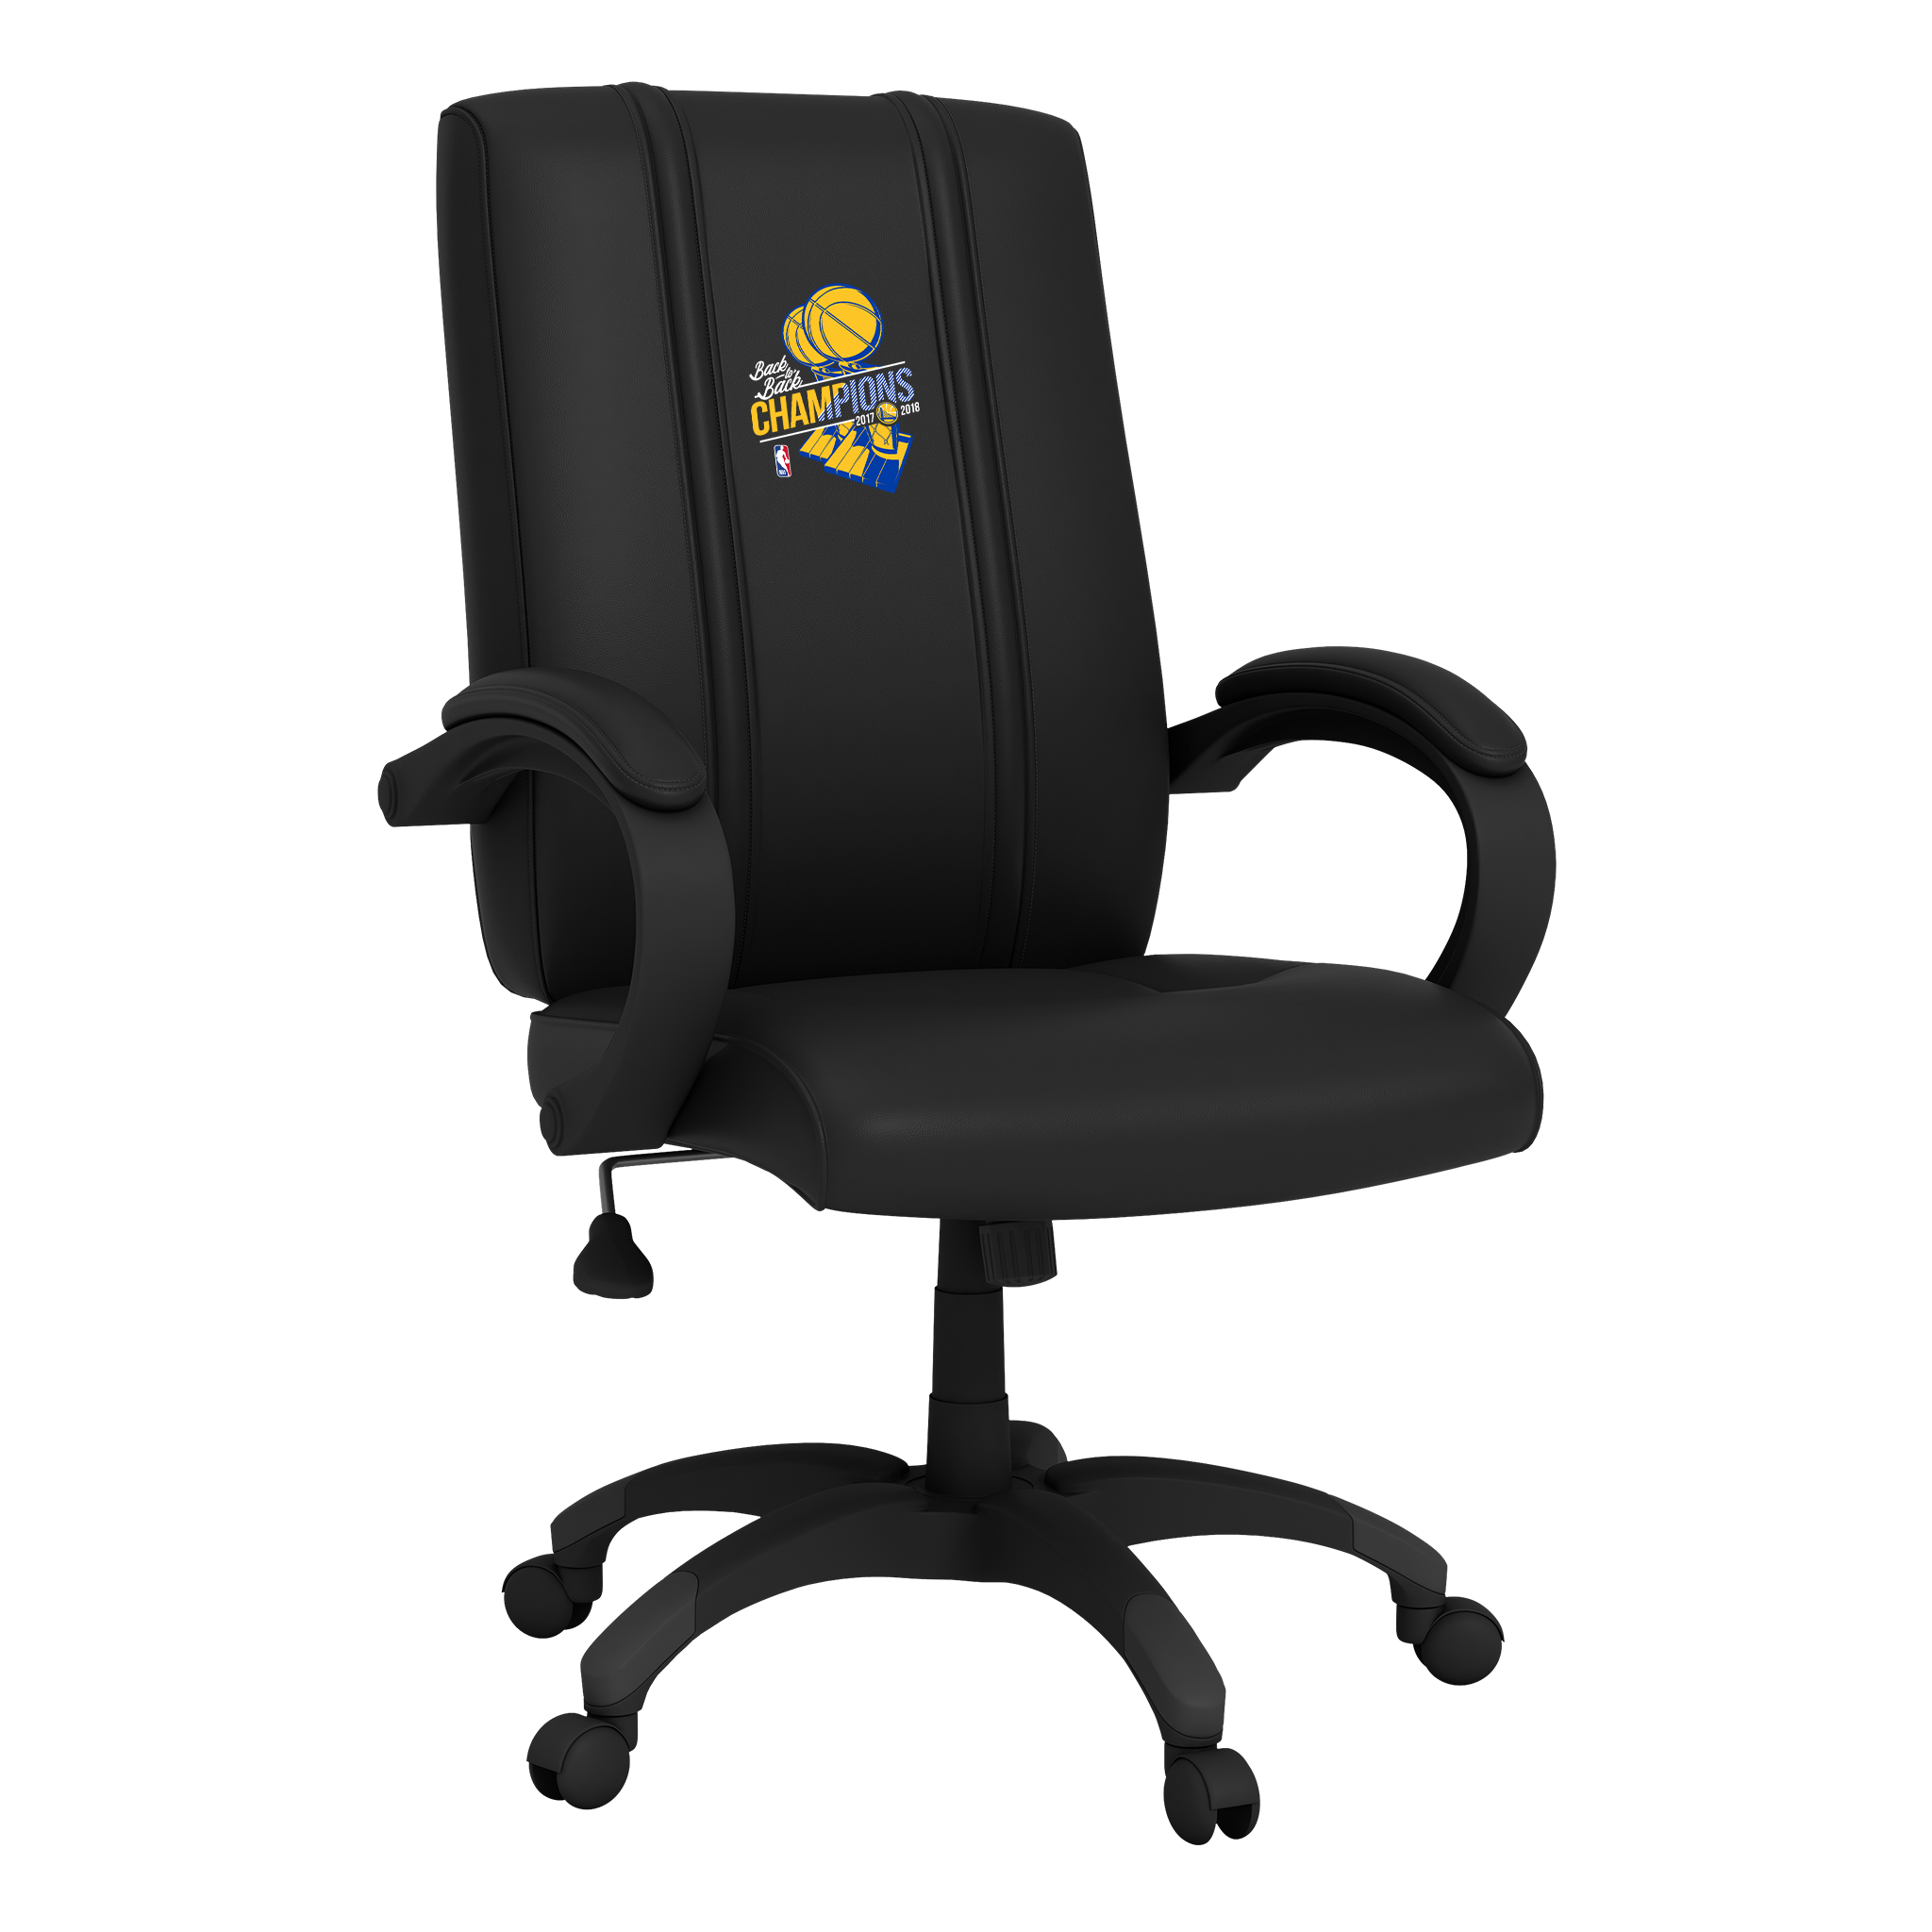 Golden State Warriors Office Chair 1000 with Golden State Warriors 2018 Champions Logo Panel